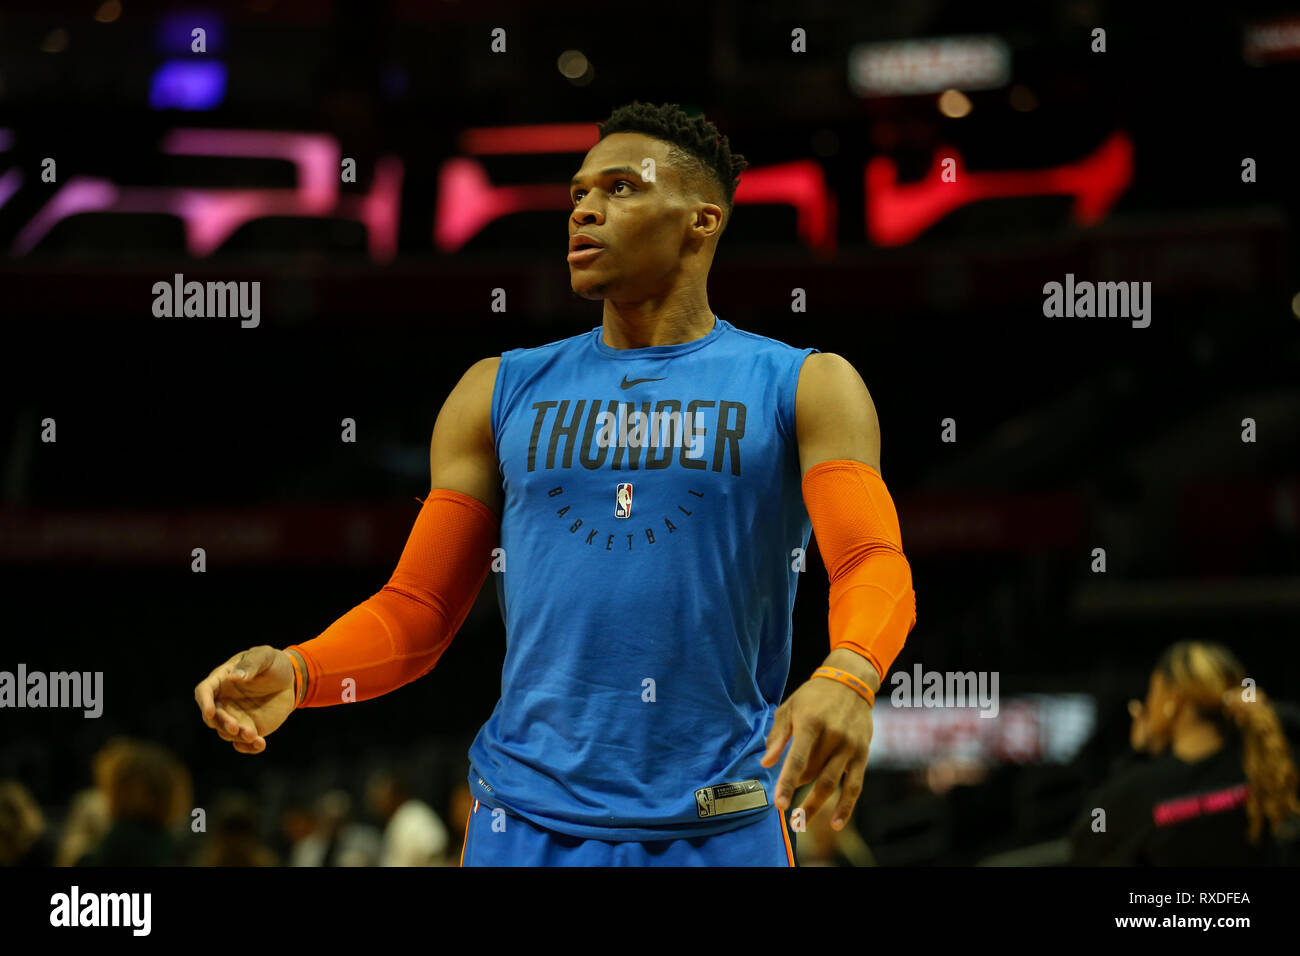 Los Angeles, CA, USA. 8th Mar, 2019. Oklahoma City Thunder guard Russell Westbrook #0 before the Oklahoma City Thunder vs Los Angeles Clippers at Staples Center on March 8, 2019. (Photo by Jevone Moore) Credit: csm/Alamy Live News Stock Photo